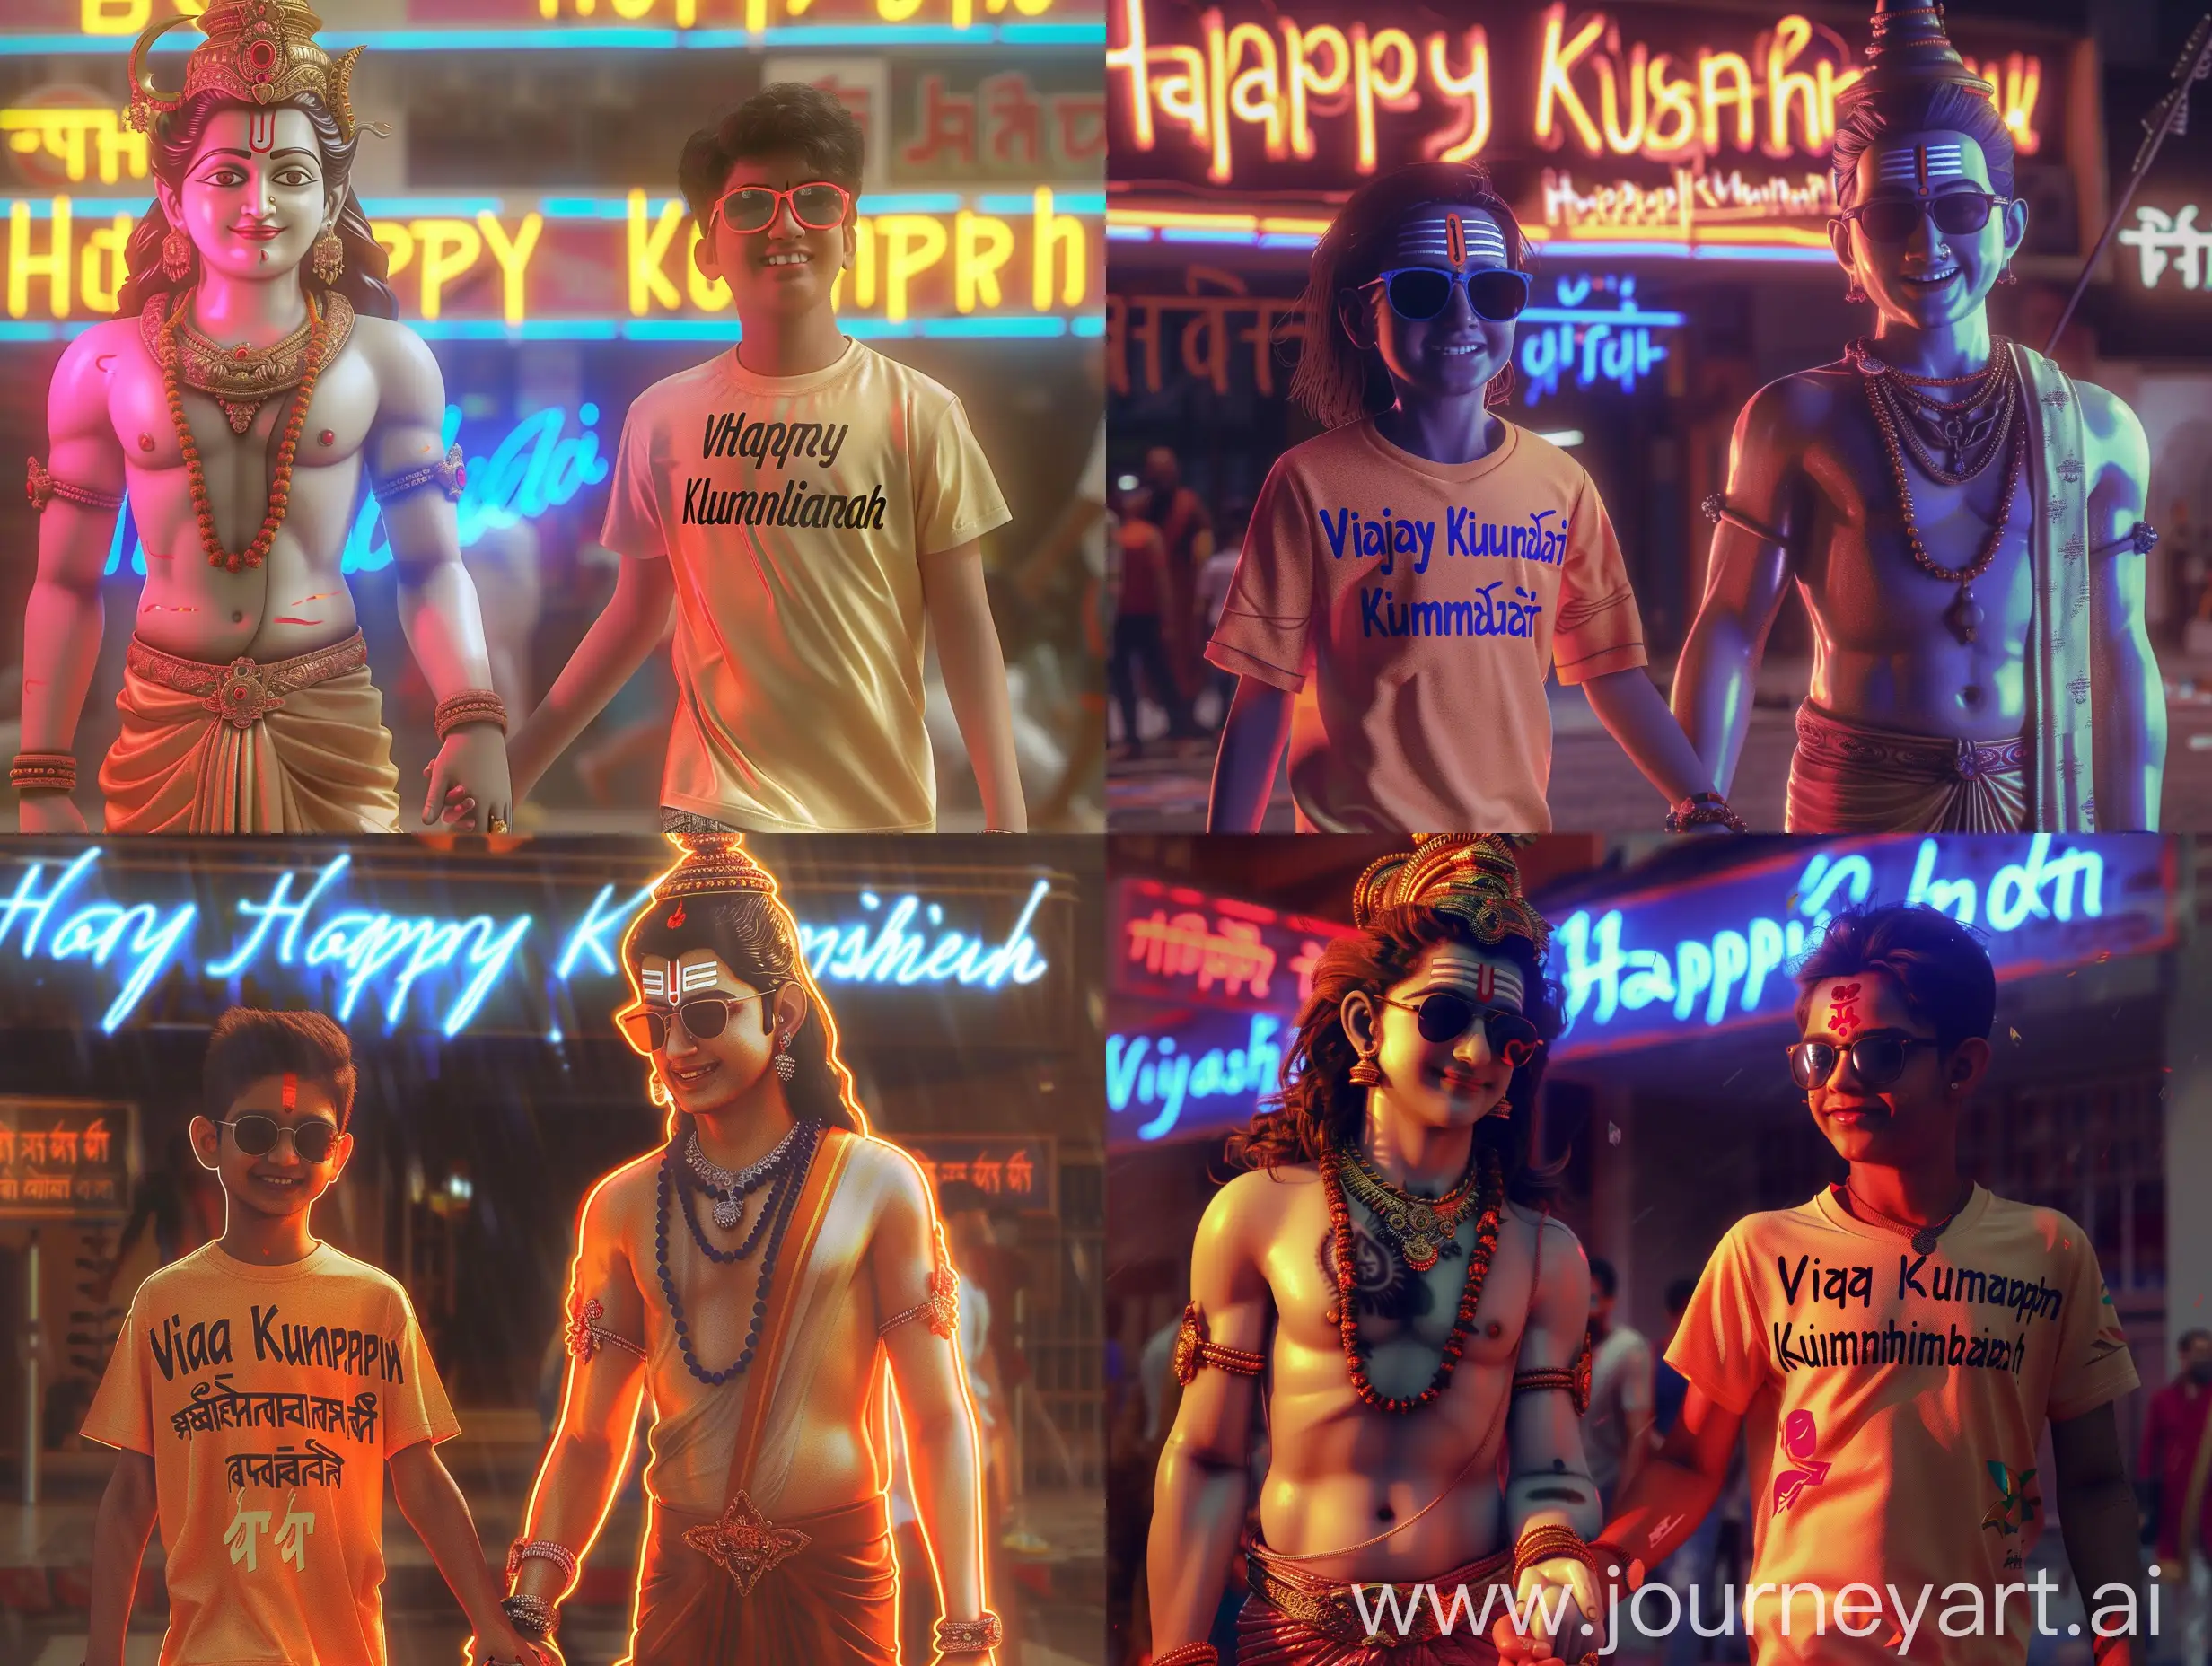 " Create an illusion the 31 year old boy closeup of lord Mahadev holding hand walking with a 31 year old boy sunglasses wearing a saffron tshirt written name " Vijay Kumawat " Big and capital font. both smiling. Background neon labels proudly display the caption " Happy Mahashivratri " , soft light reflection